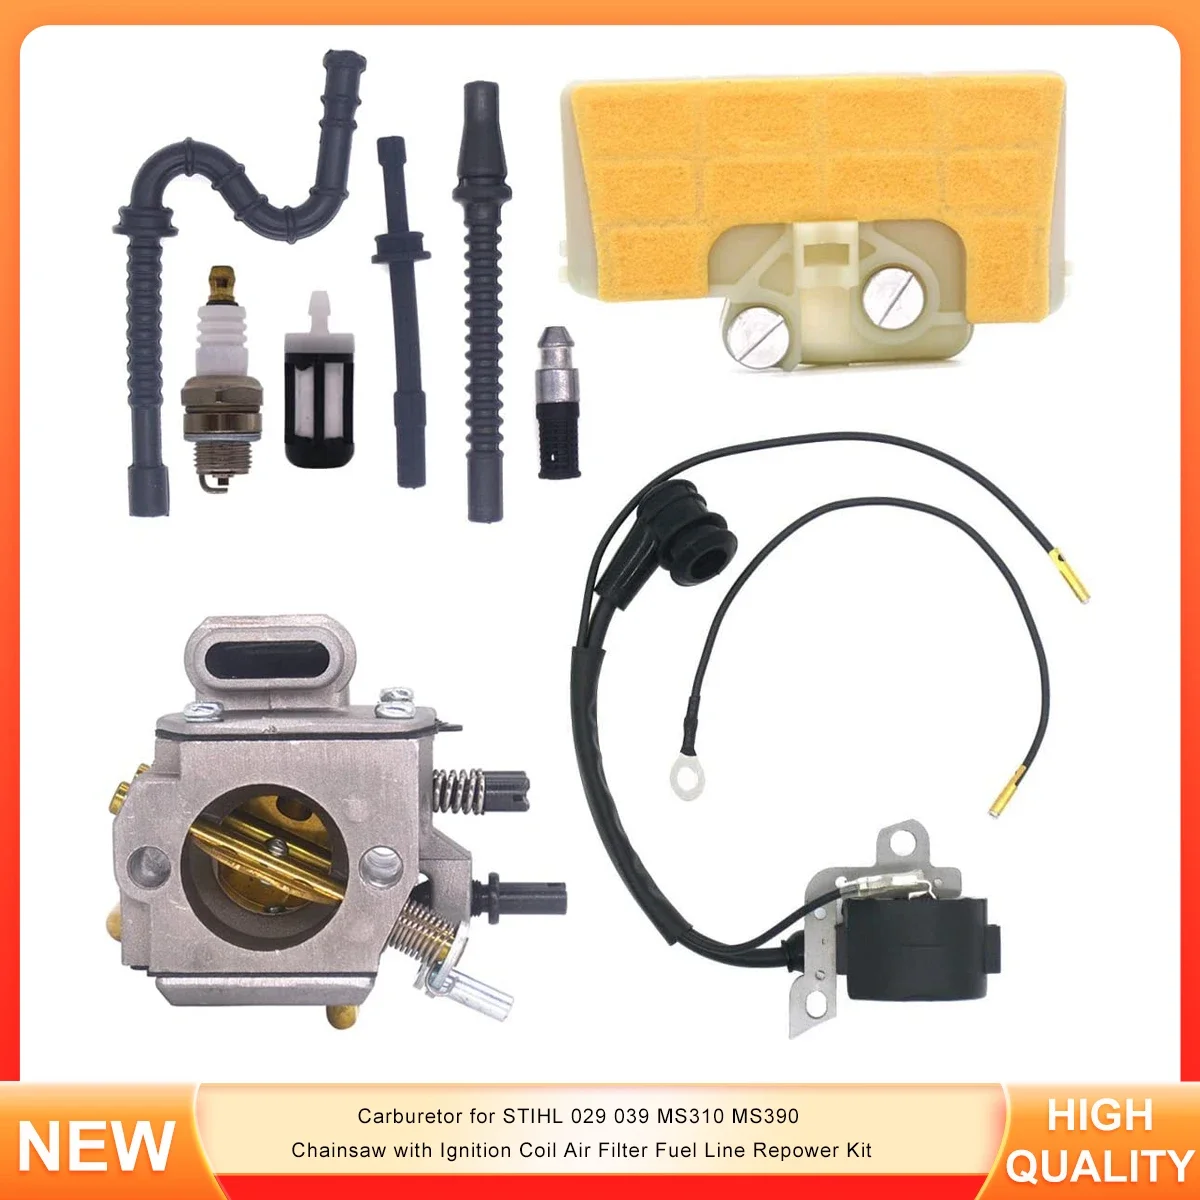 

Carburetor for STIHL 029 039 MS310 MS390 Chainsaw with Ignition Coil Air Filter Fuel Line Repower Kit